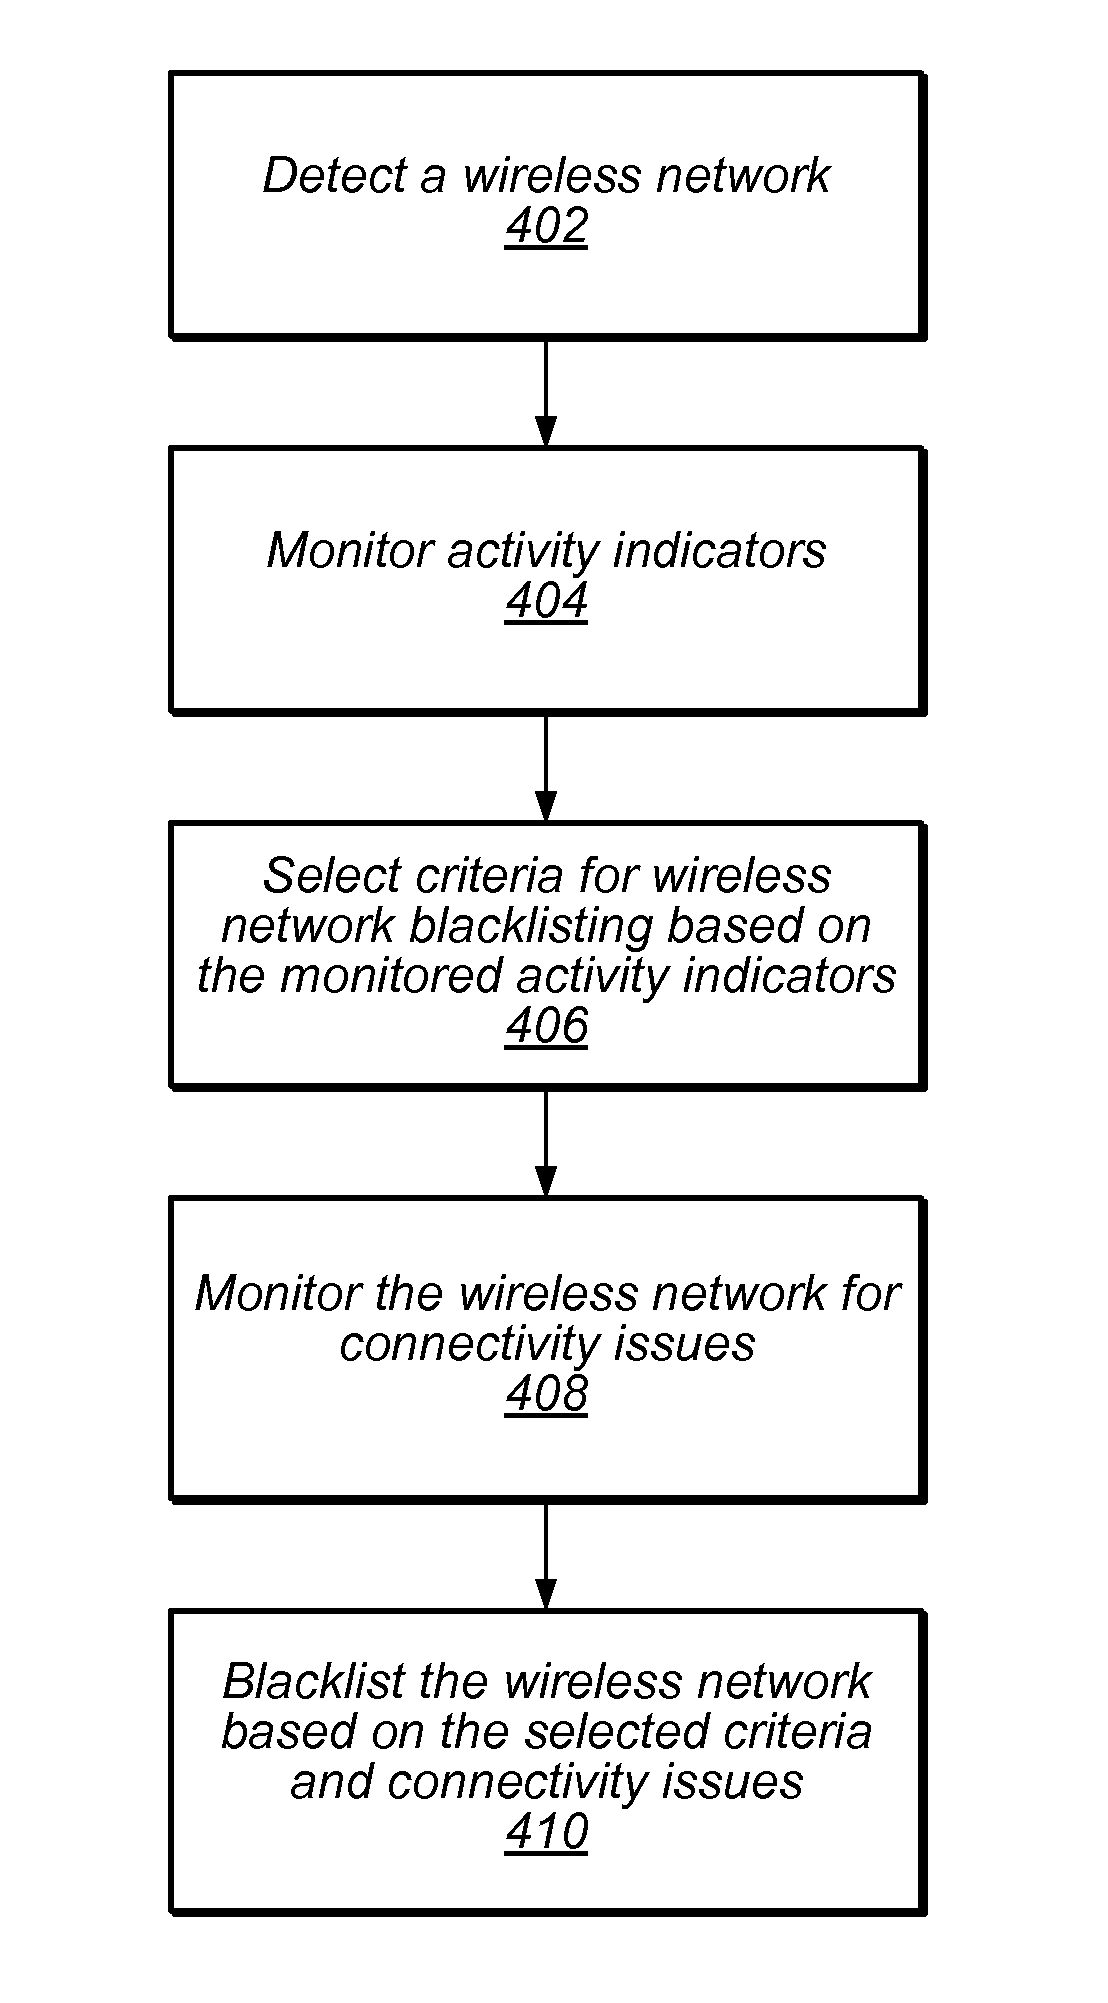 Automatically modifying wireless network connection policies based on user activity levels